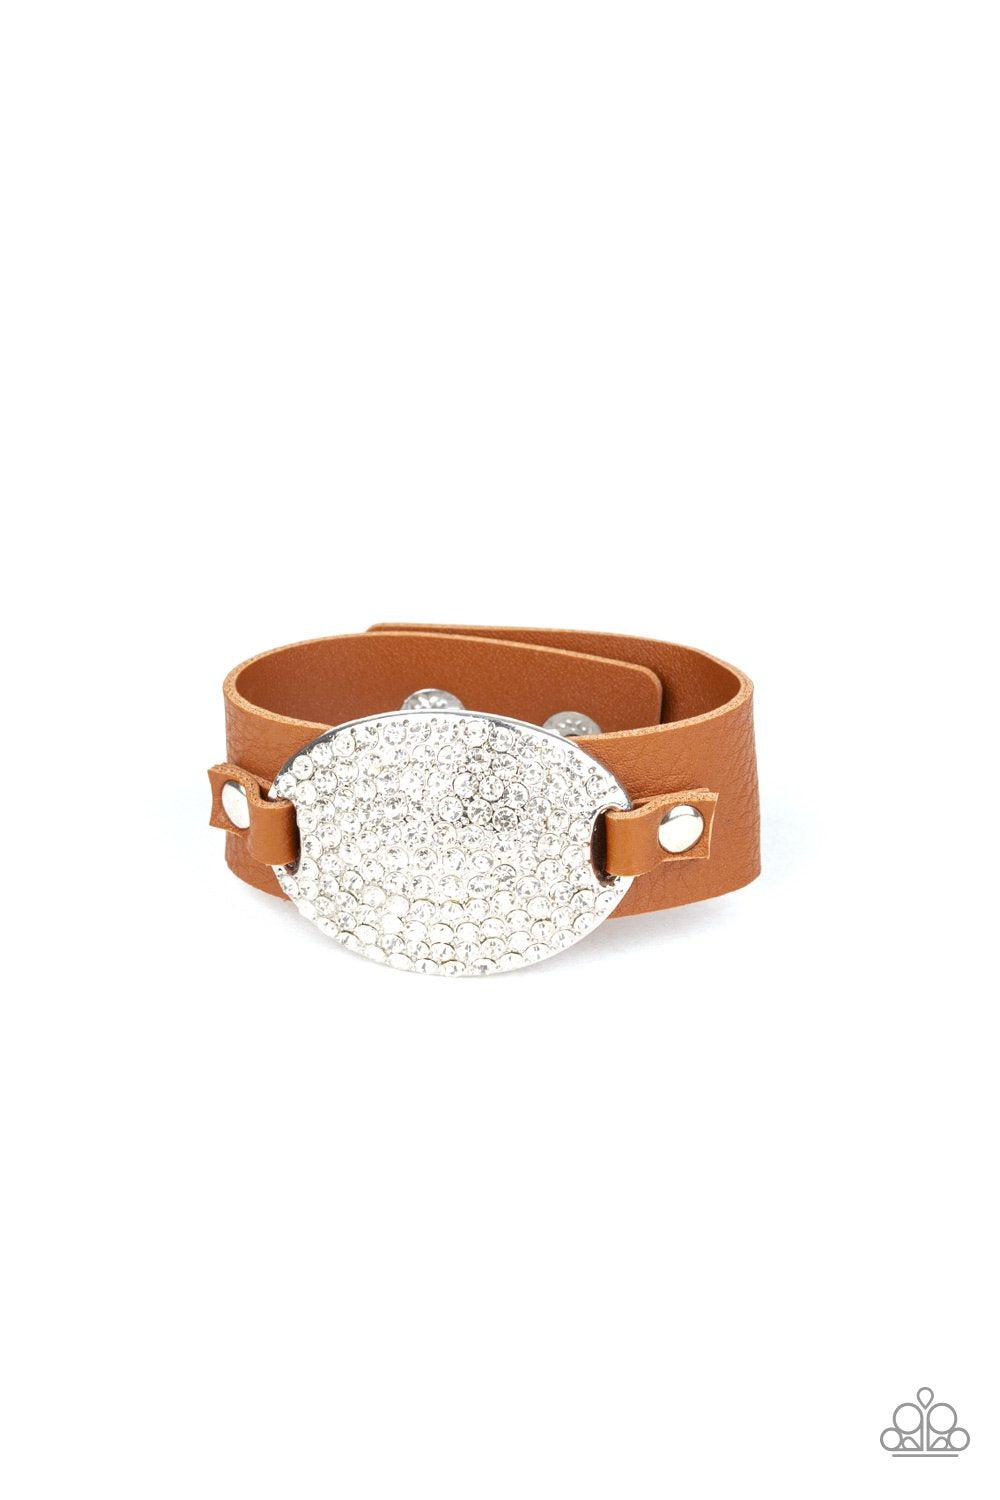 Better Recognize Brown Leather and White Rhinestone Urban Wrap Snap Bracelet - Paparazzi Accessories-CarasShop.com - $5 Jewelry by Cara Jewels